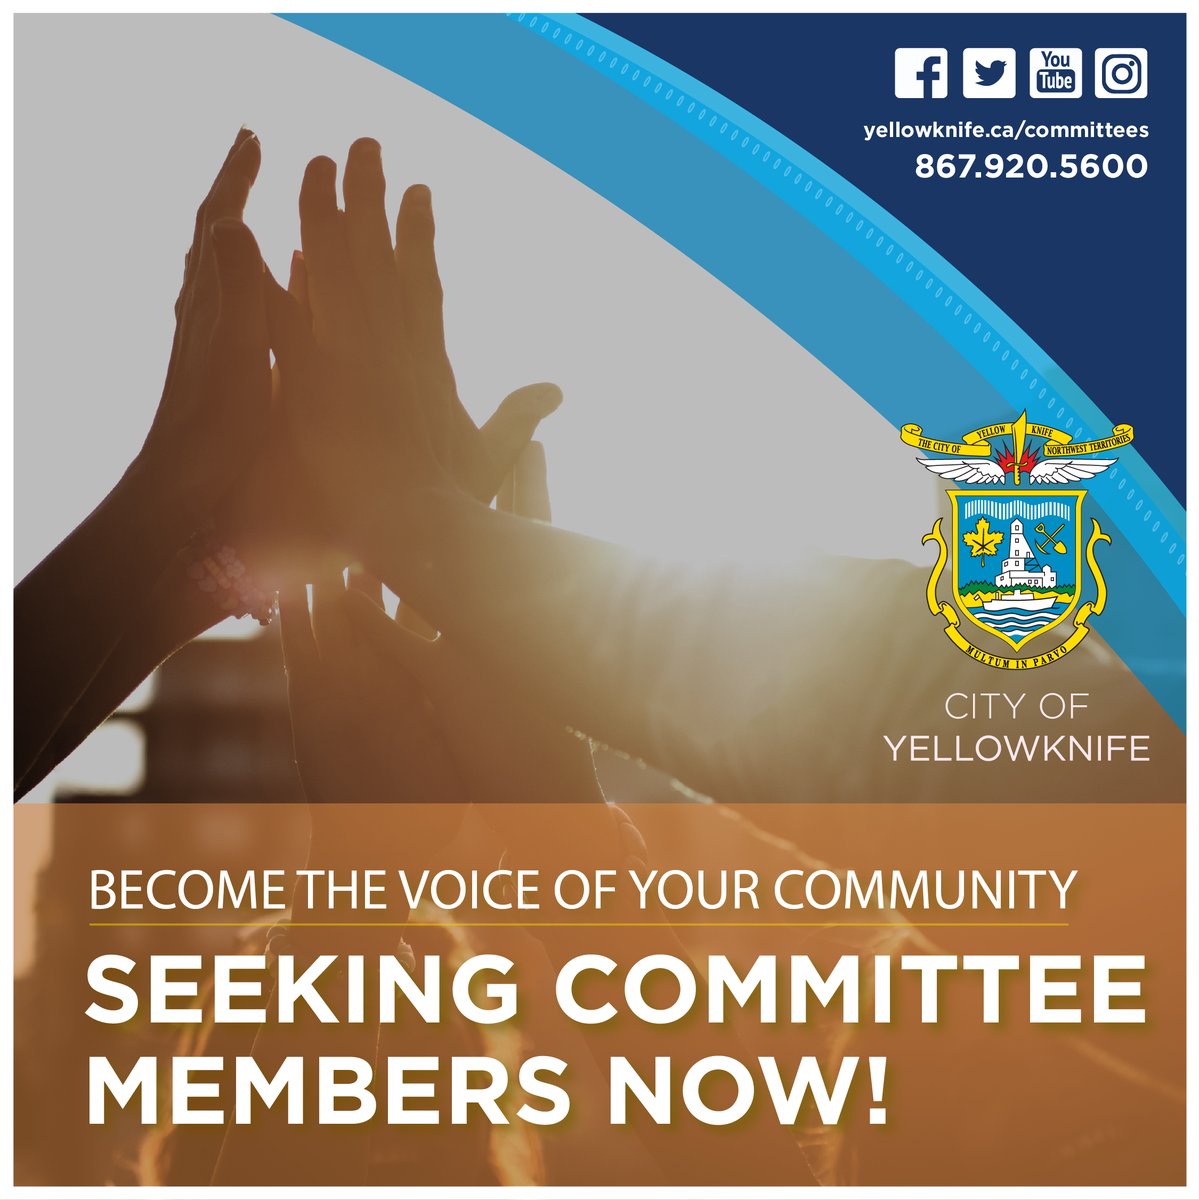 Get involved in the community by joining the Community Advisory Board on Homelessness! This board is currently recruiting one representative from a landlord association and or/non-government housing sector. More info here: yellowknife.ca/committees